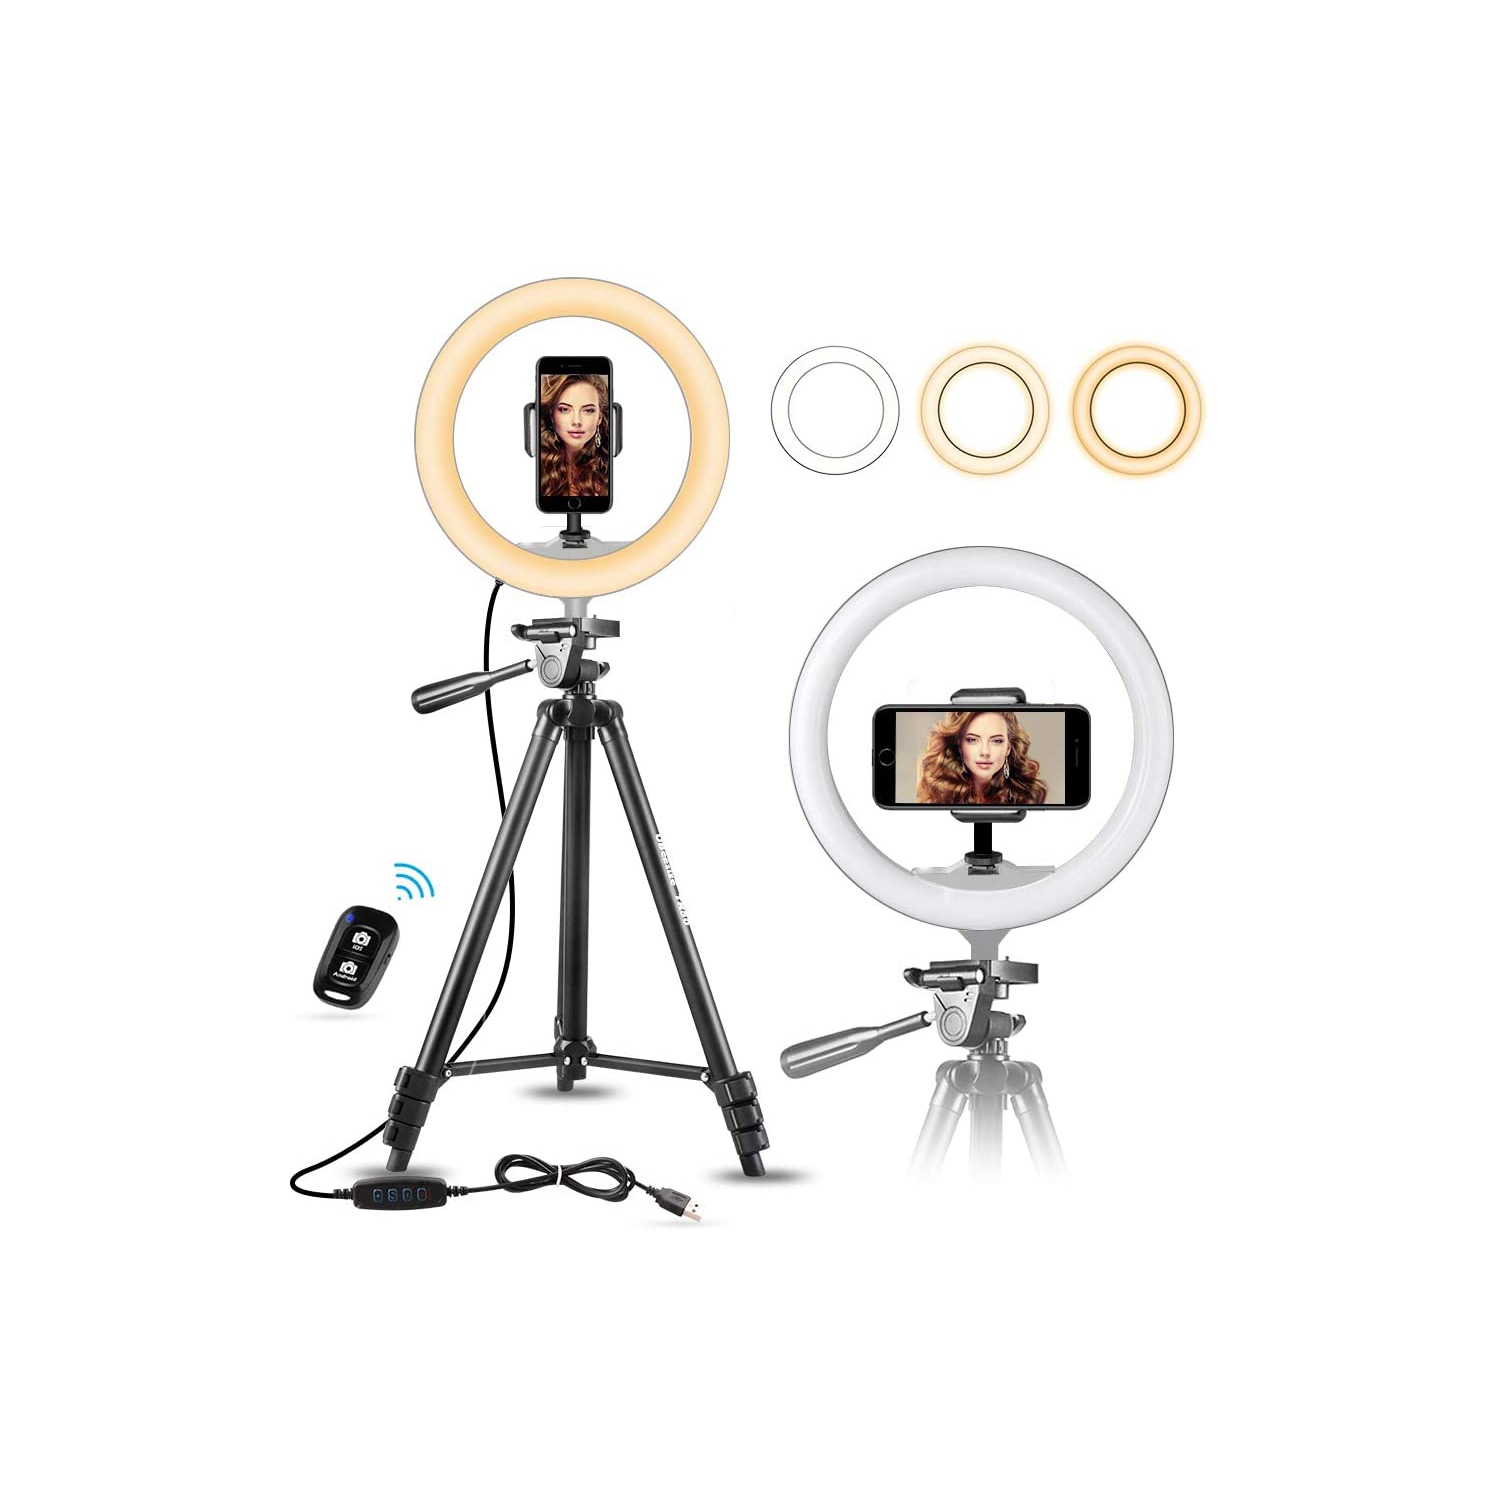 Upgraded Dimmable Camera Ring Light with Phone Holder for TikTok/YouTube/Live Stream/Makeup/Photography Compatible with iPhone Android Samsung 8 Selfie Ring Light with Adjustable Tripod Stand 